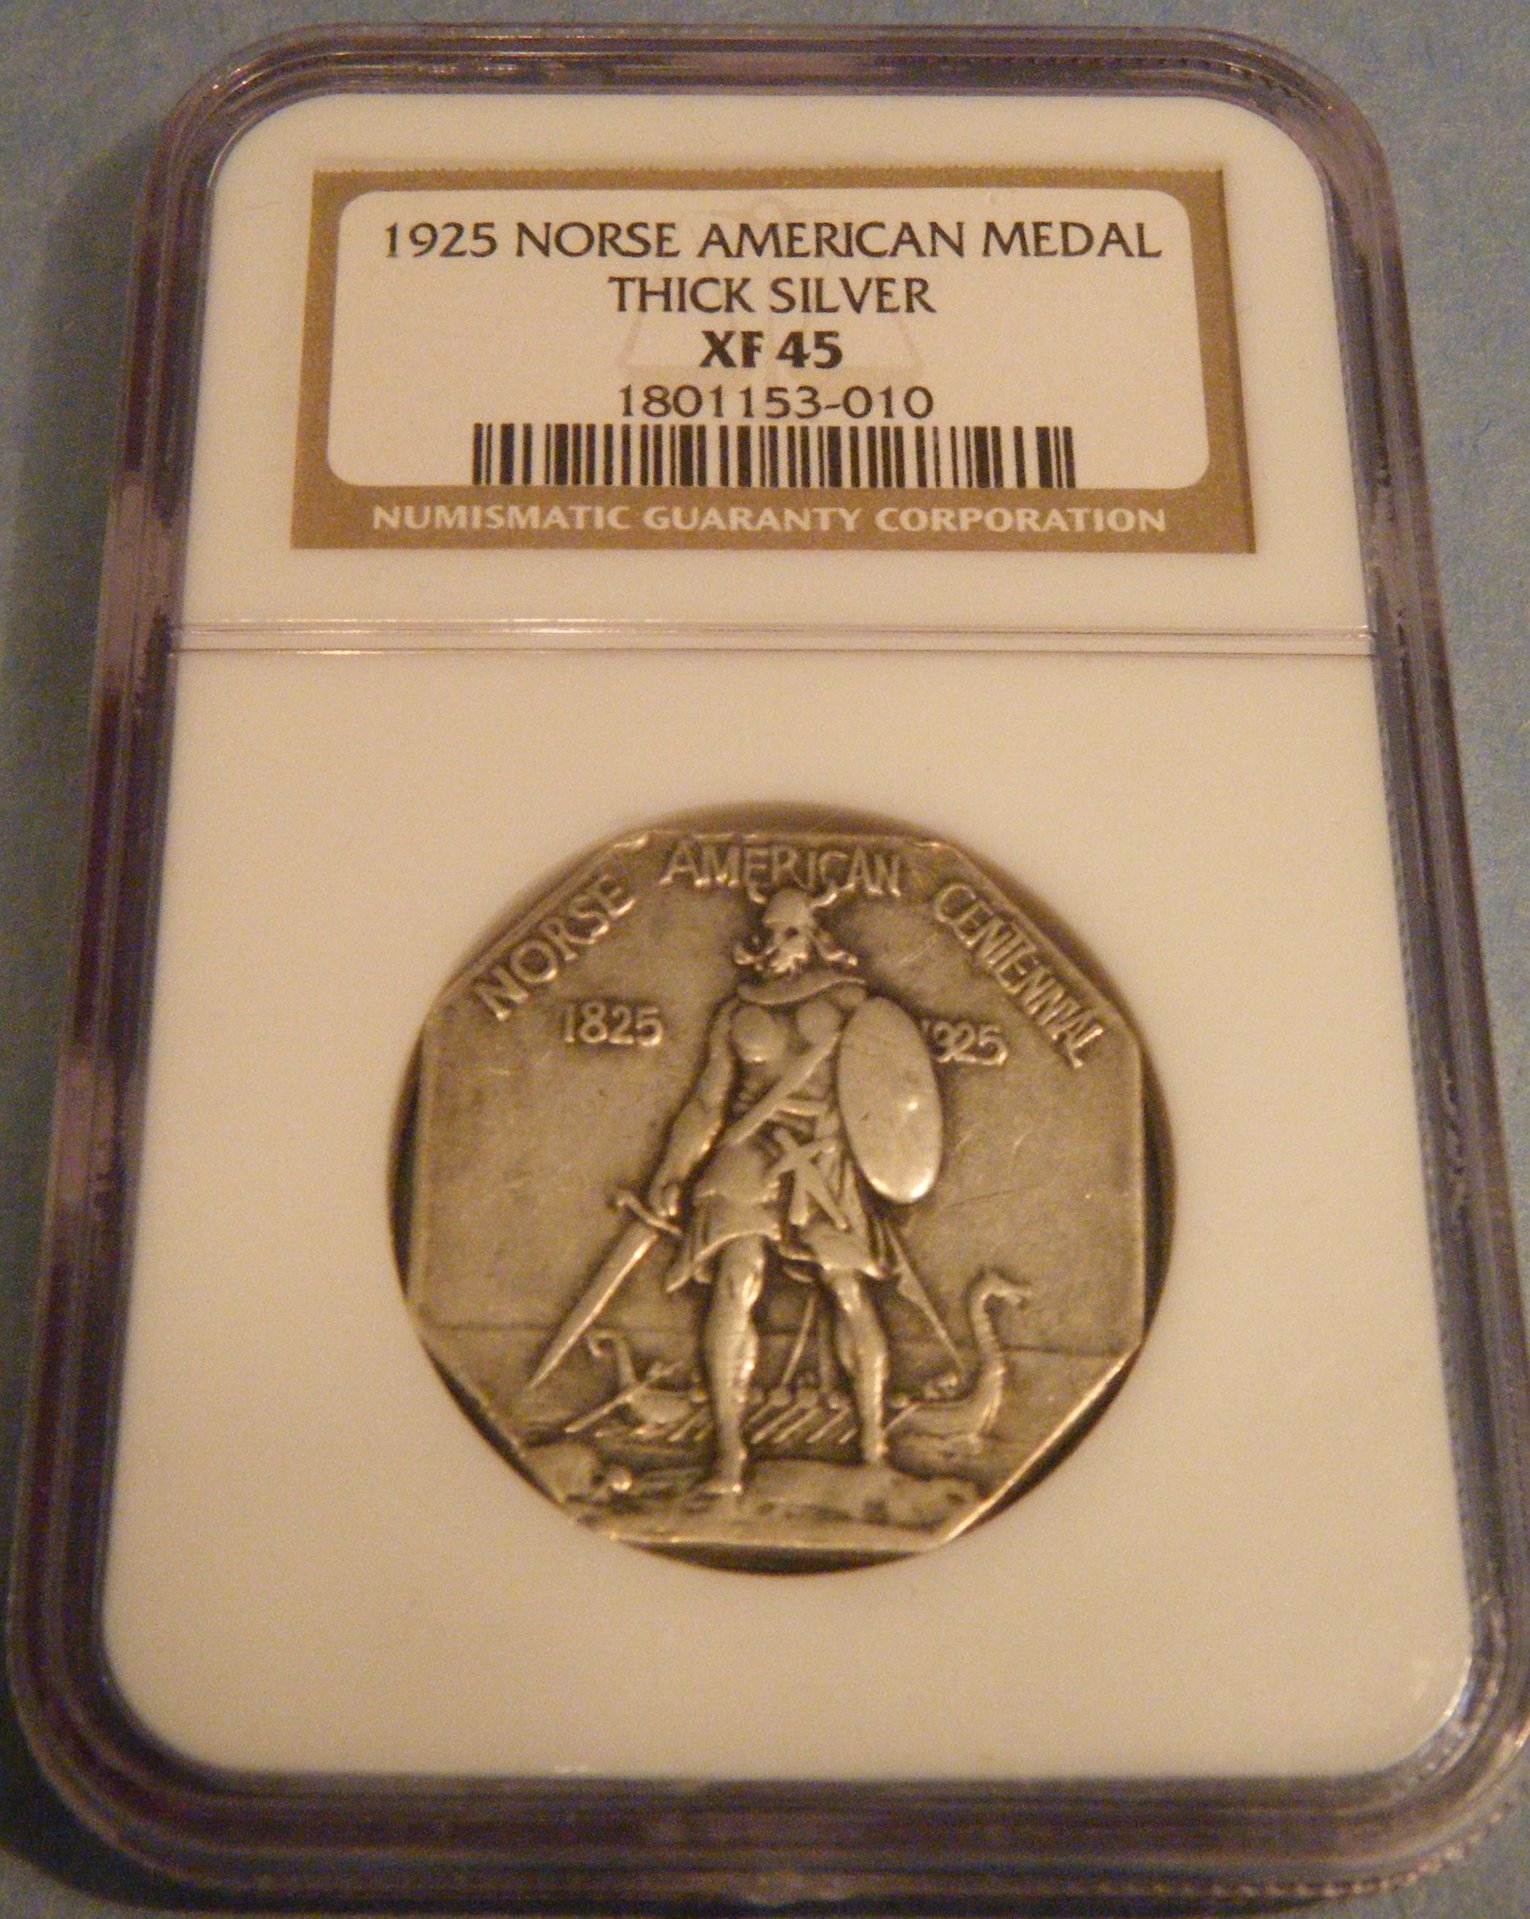 1925 Norse American Thick Obv.jpg